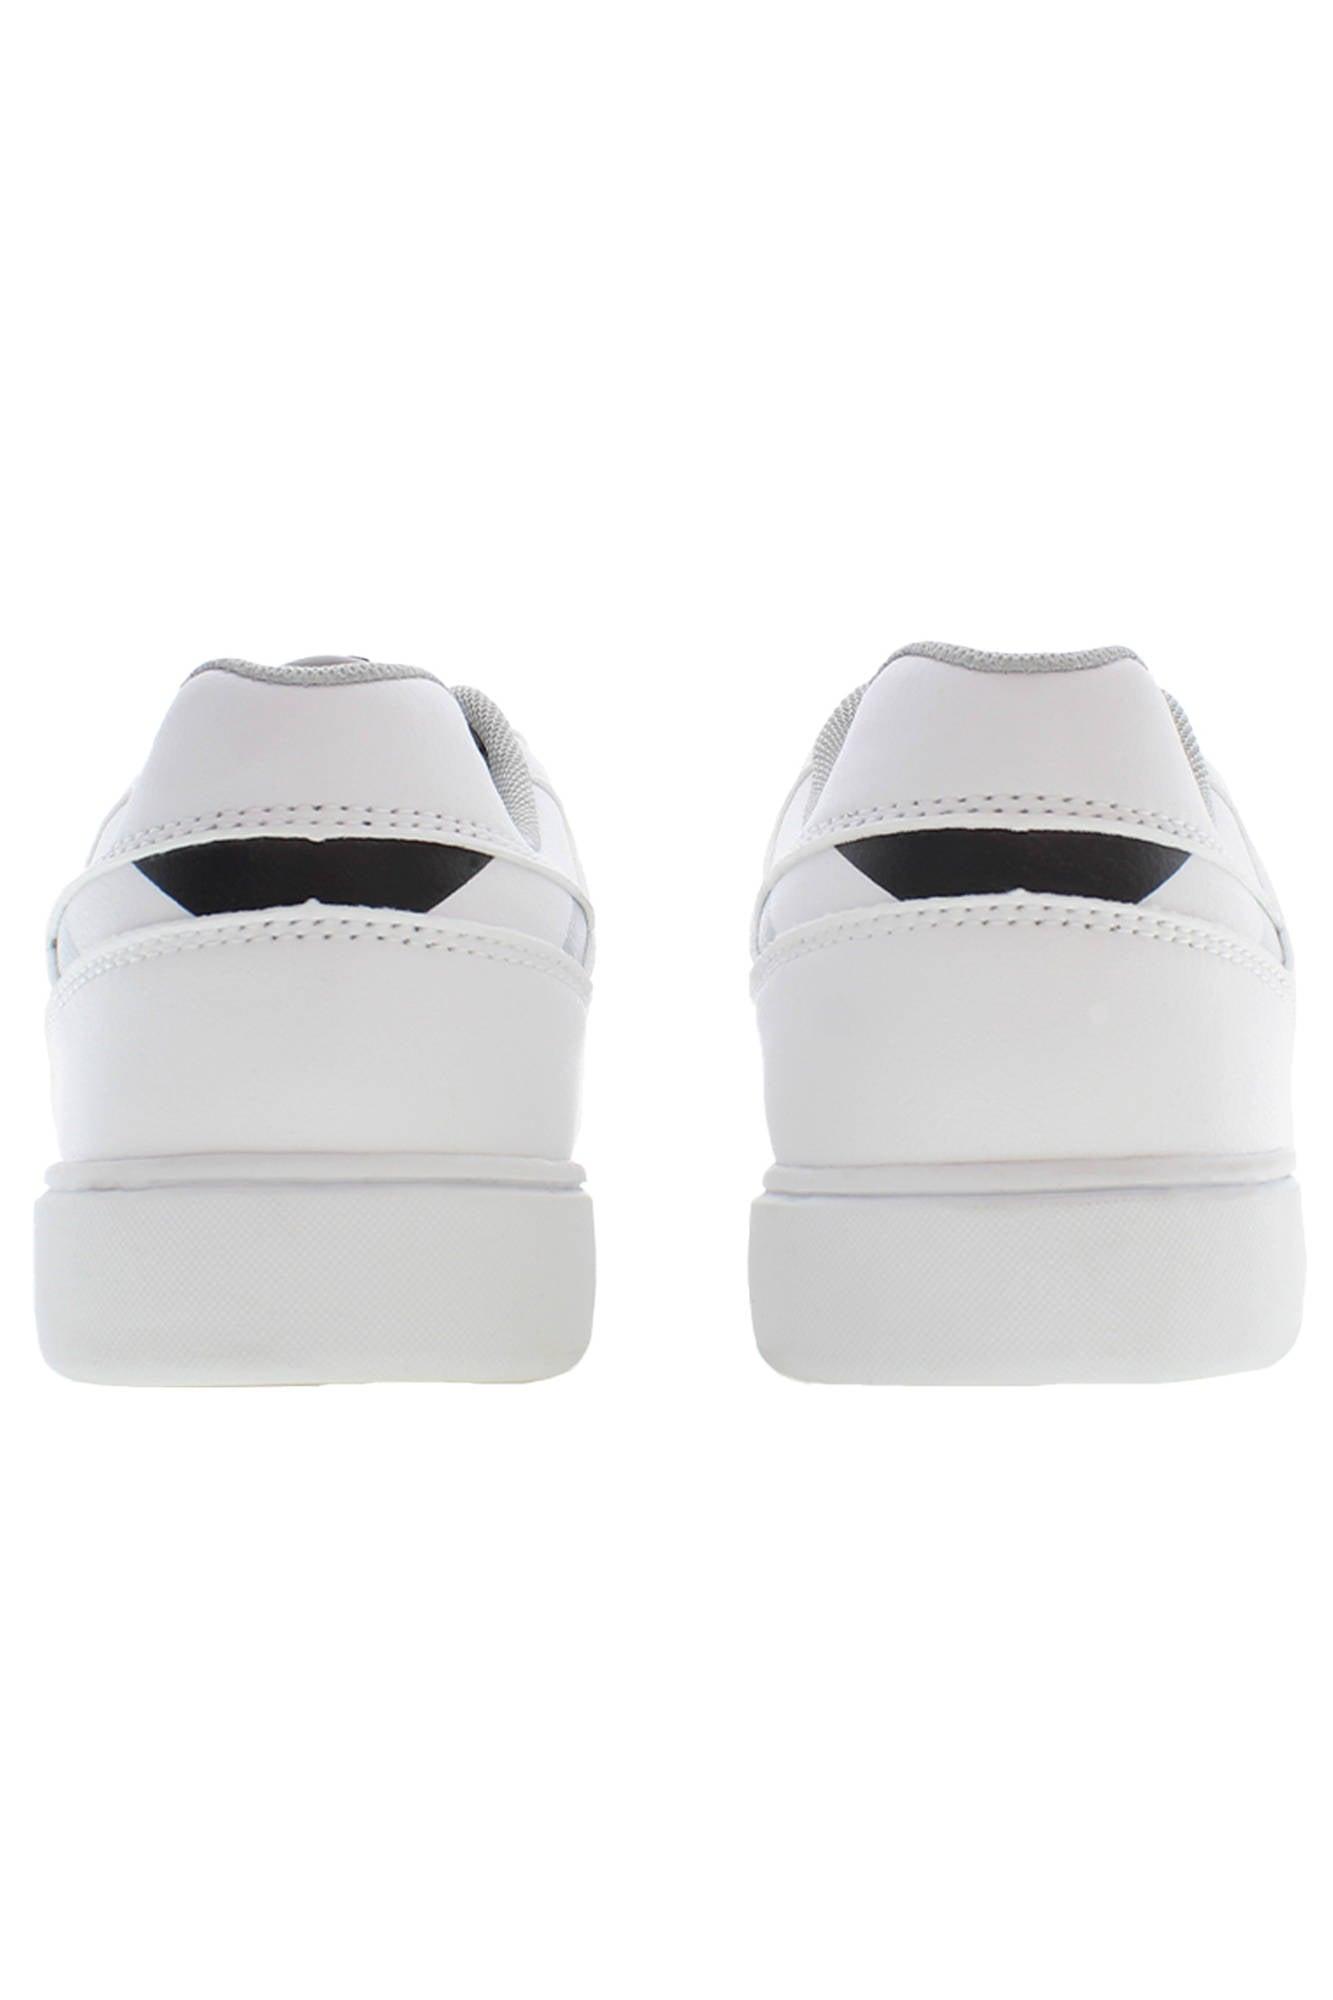 U.S. POLO ASSN. Sneakers in White for Men | Lyst UK